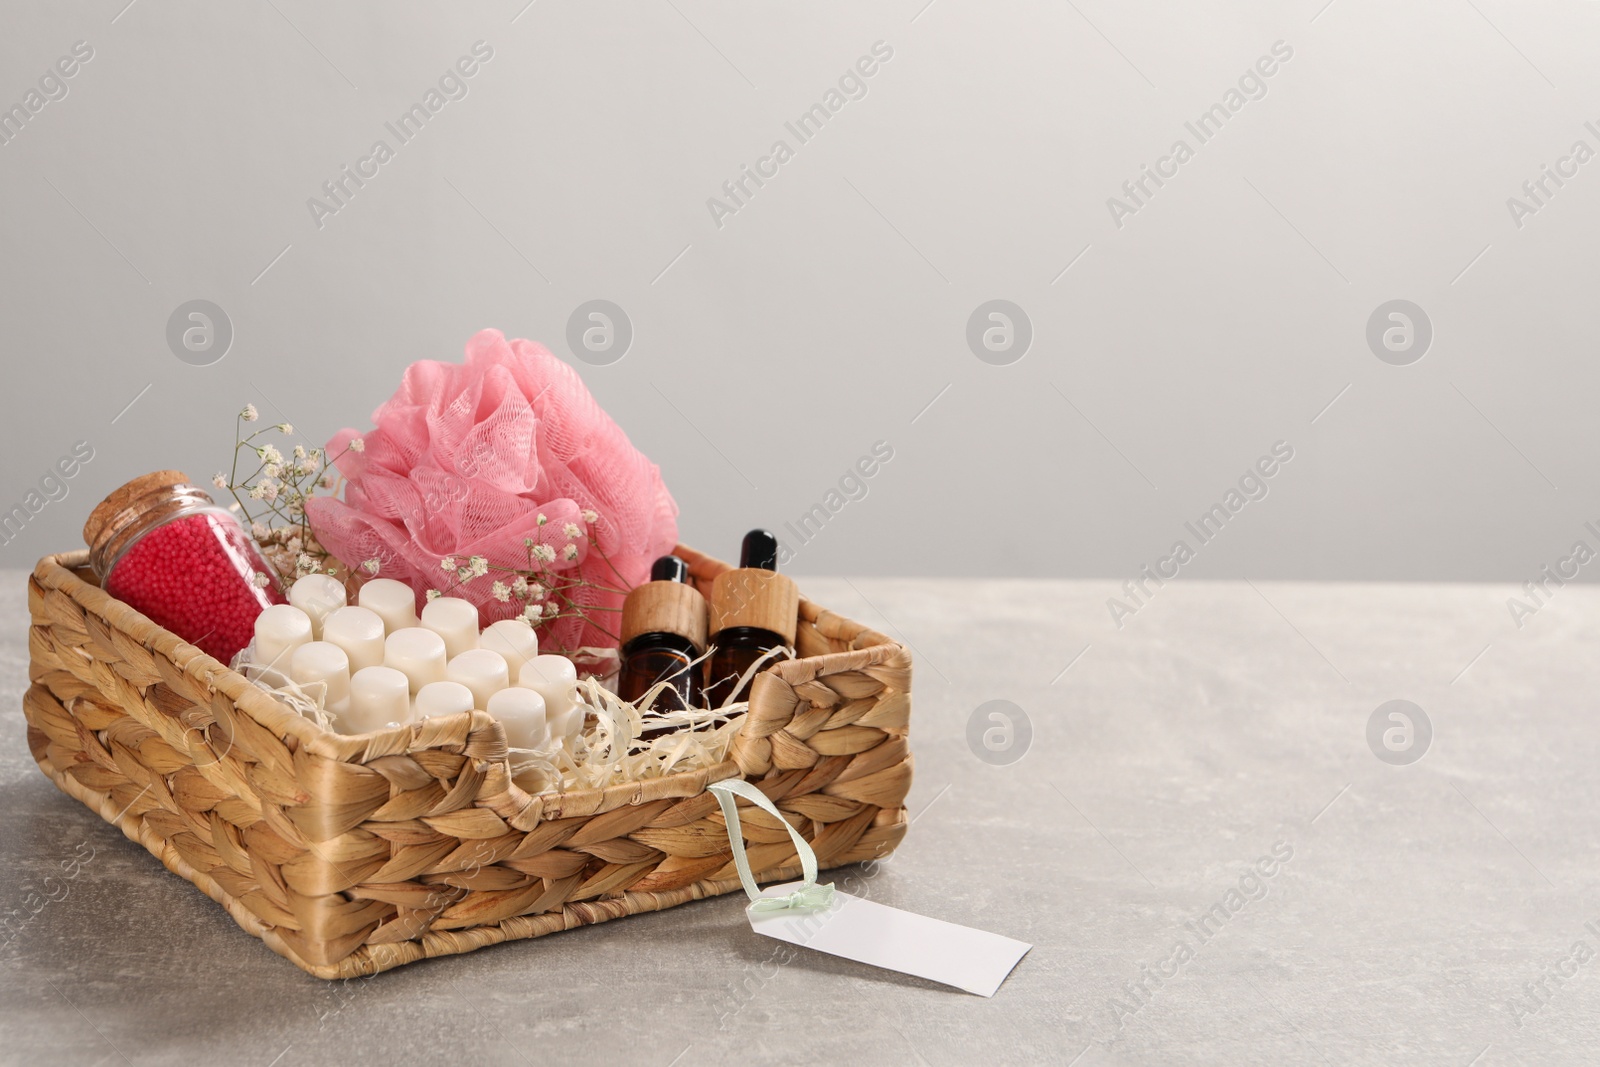 Photo of Spa gift set of different luxury products in wicker basket on grey table, space for text